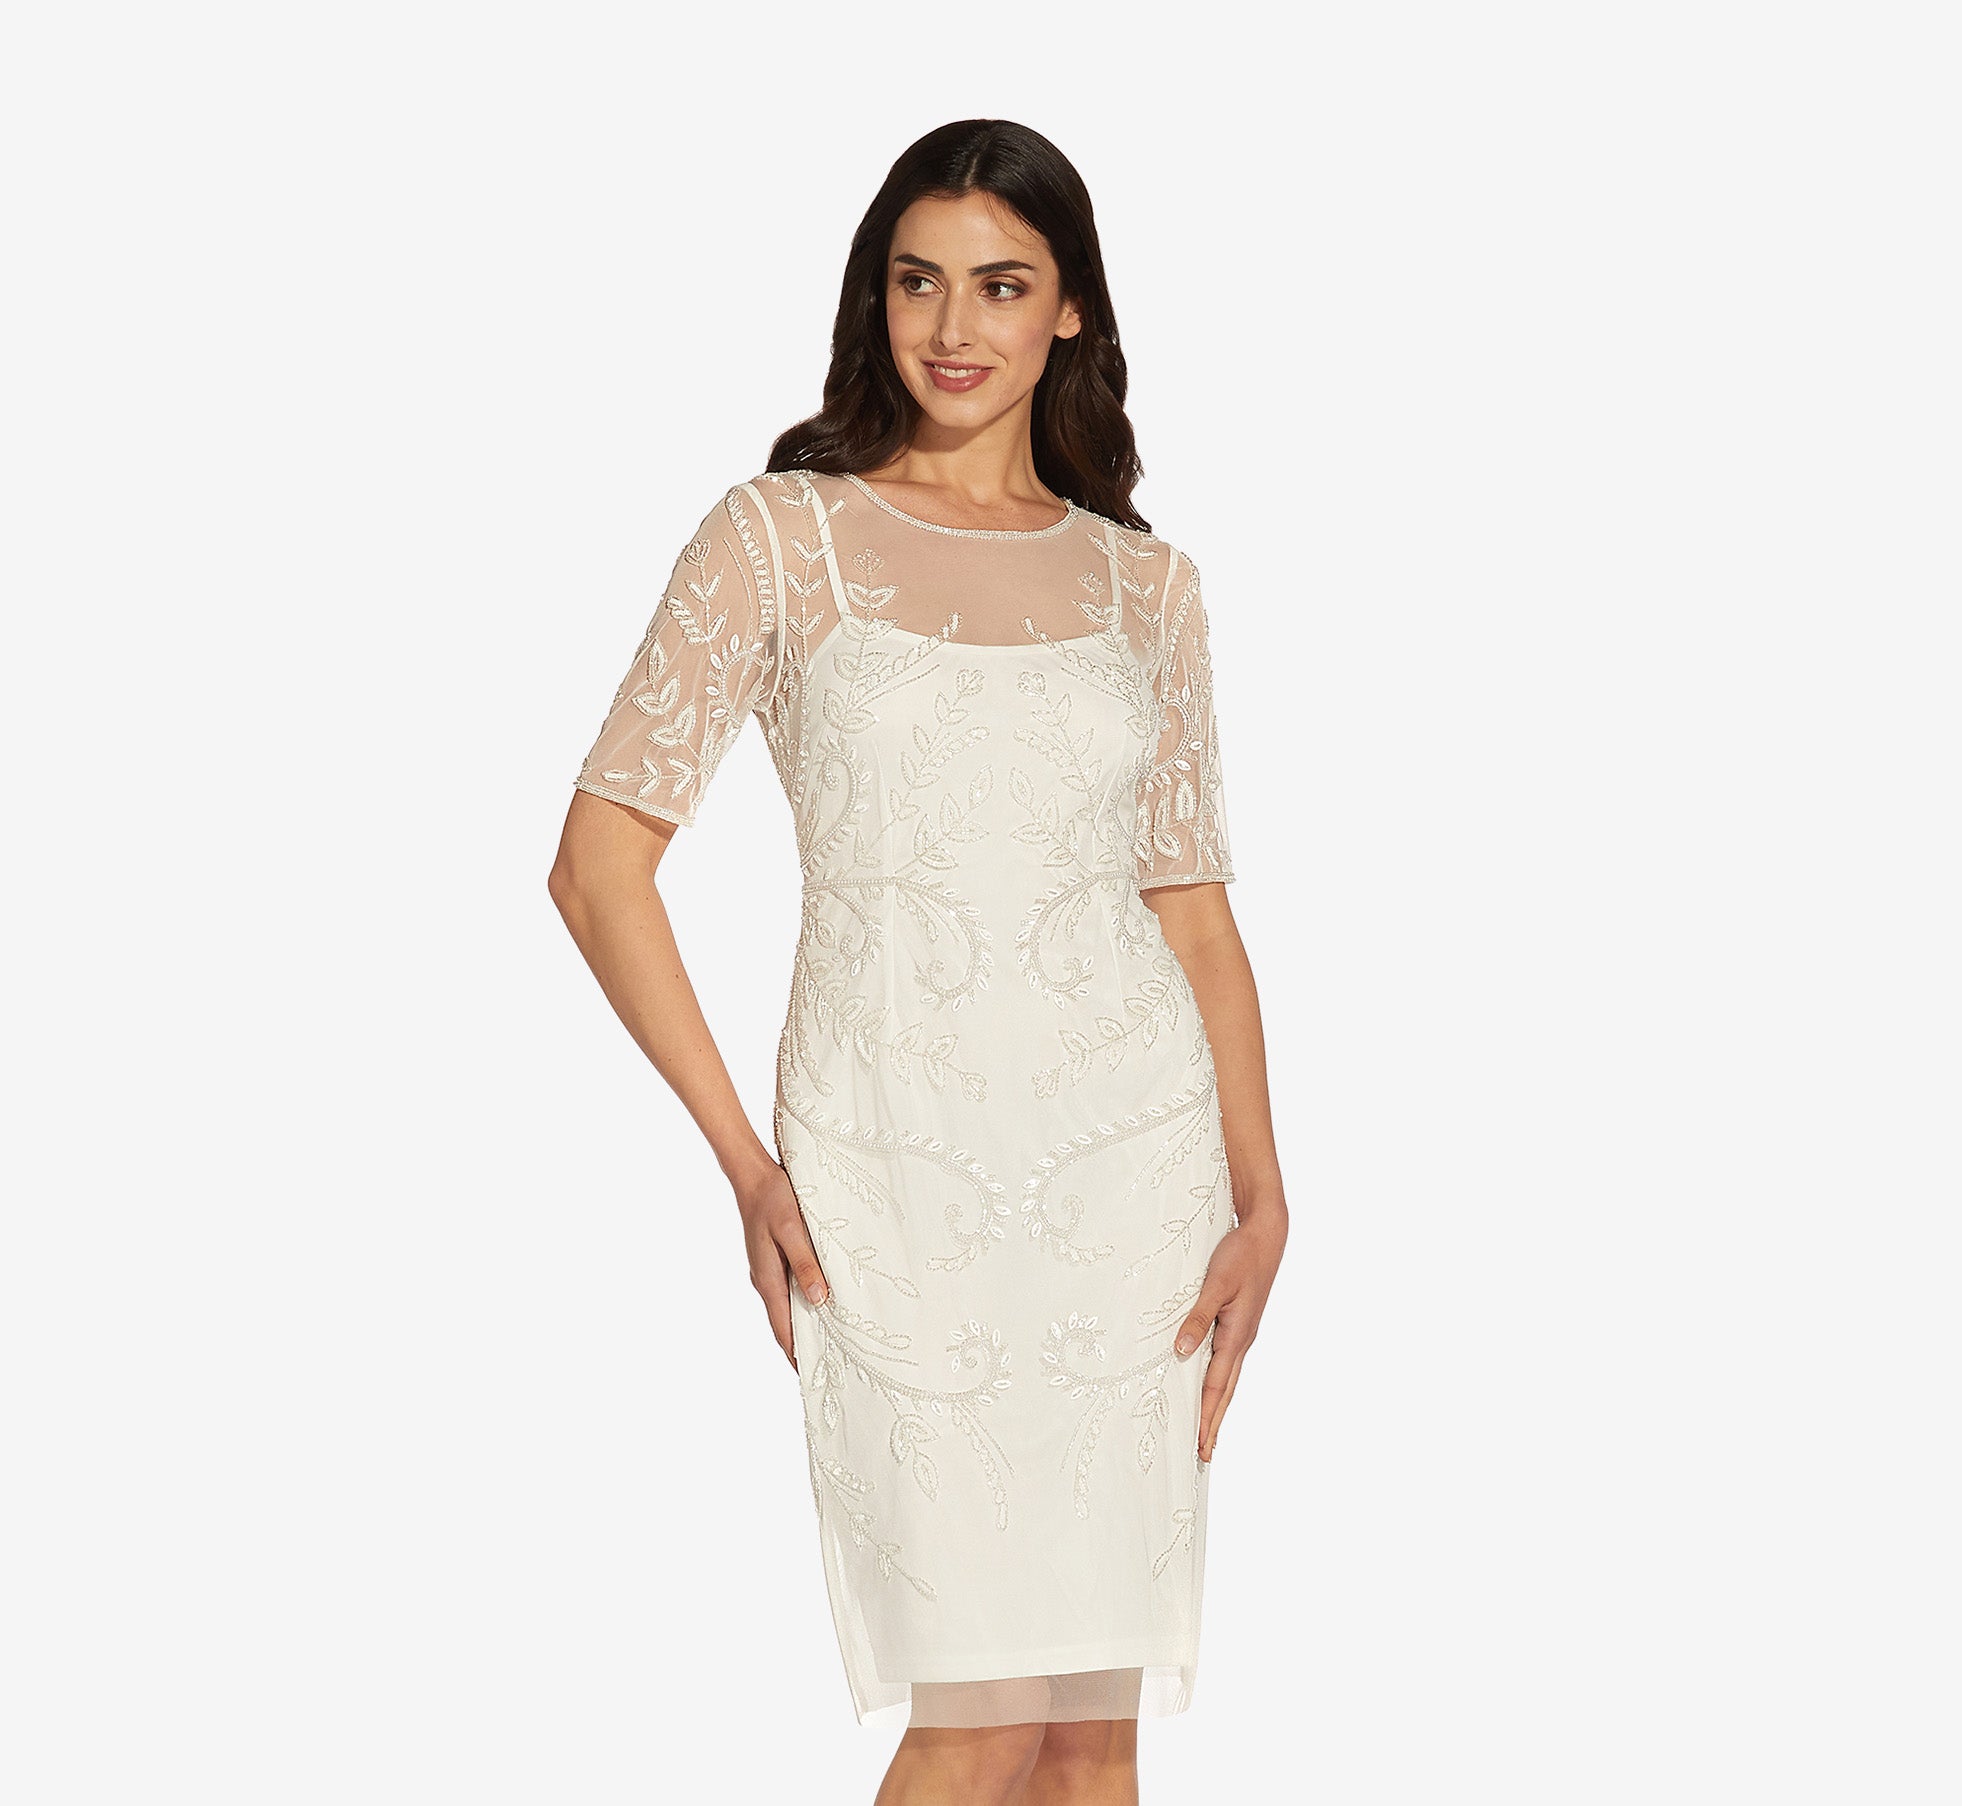 Adrianna Papell Beaded Illusion 3/4 Sleeve Scoop Neck Gown | Dillard's |  Lace evening dresses, Mother of the bride dresses, Gowns